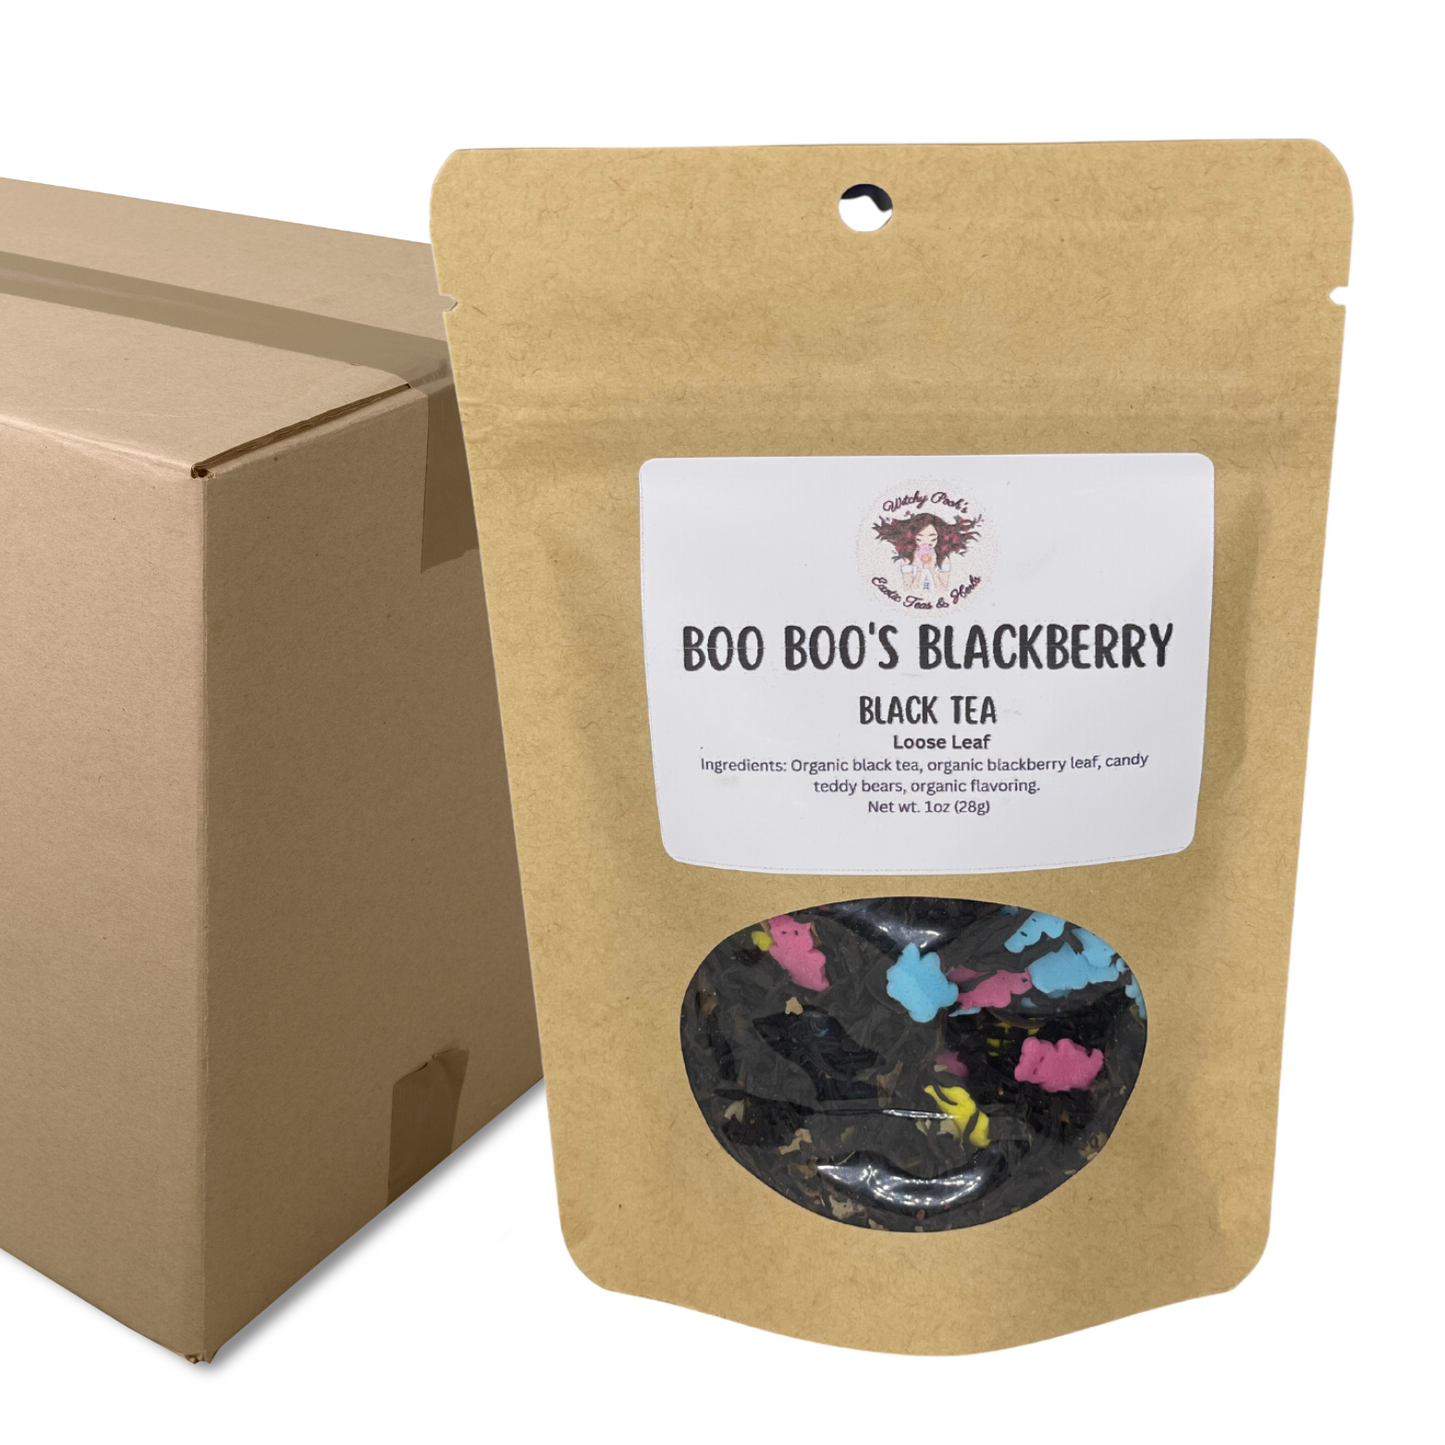 Boo Boo's Blackberry Flavored Loose Leaf Black Tea with Candy Teddy Bears